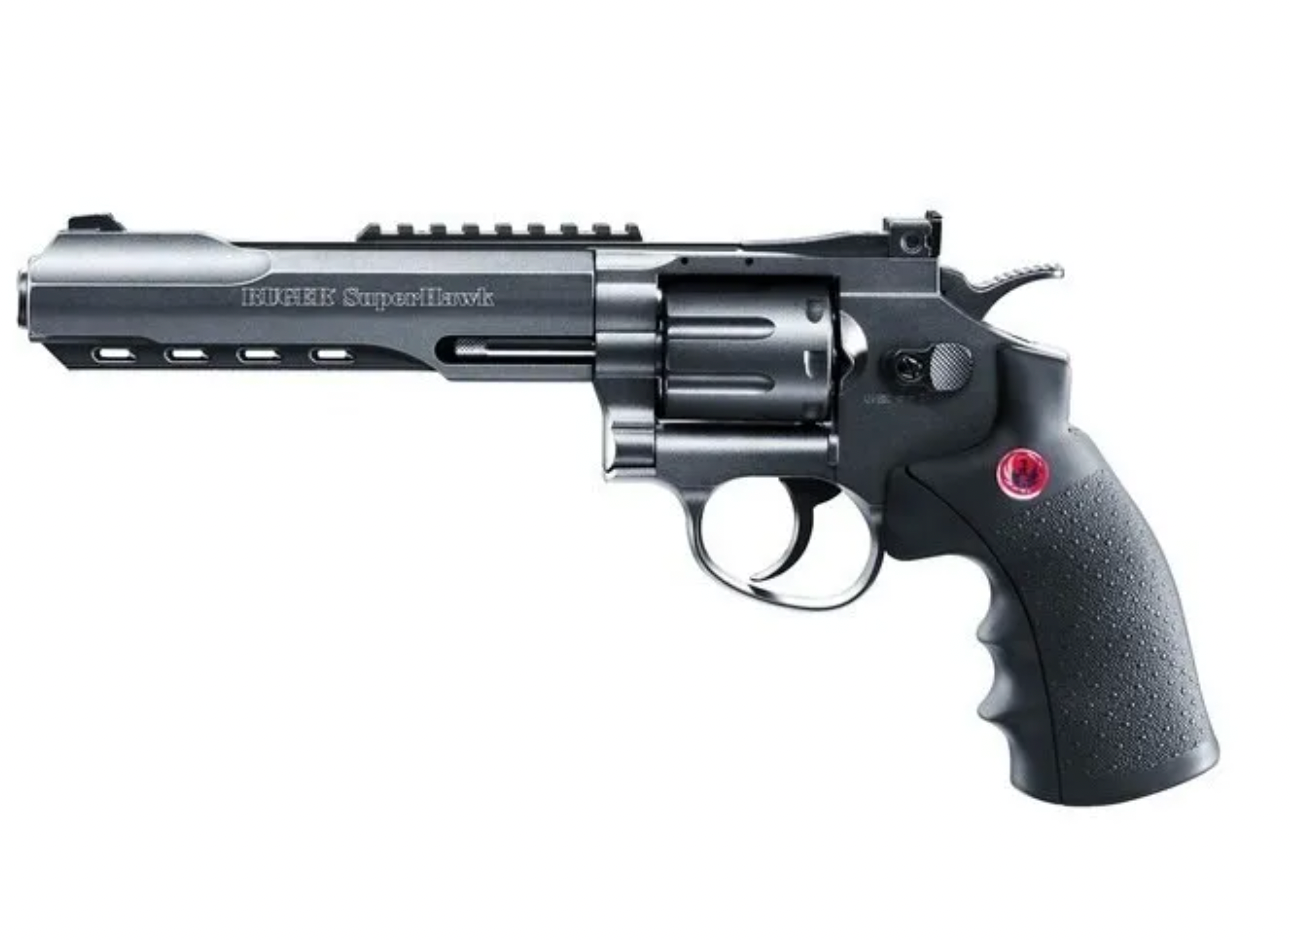 Revolver Ruger Superhawk / Airsoft / Co2 - hiking outdoor Chile